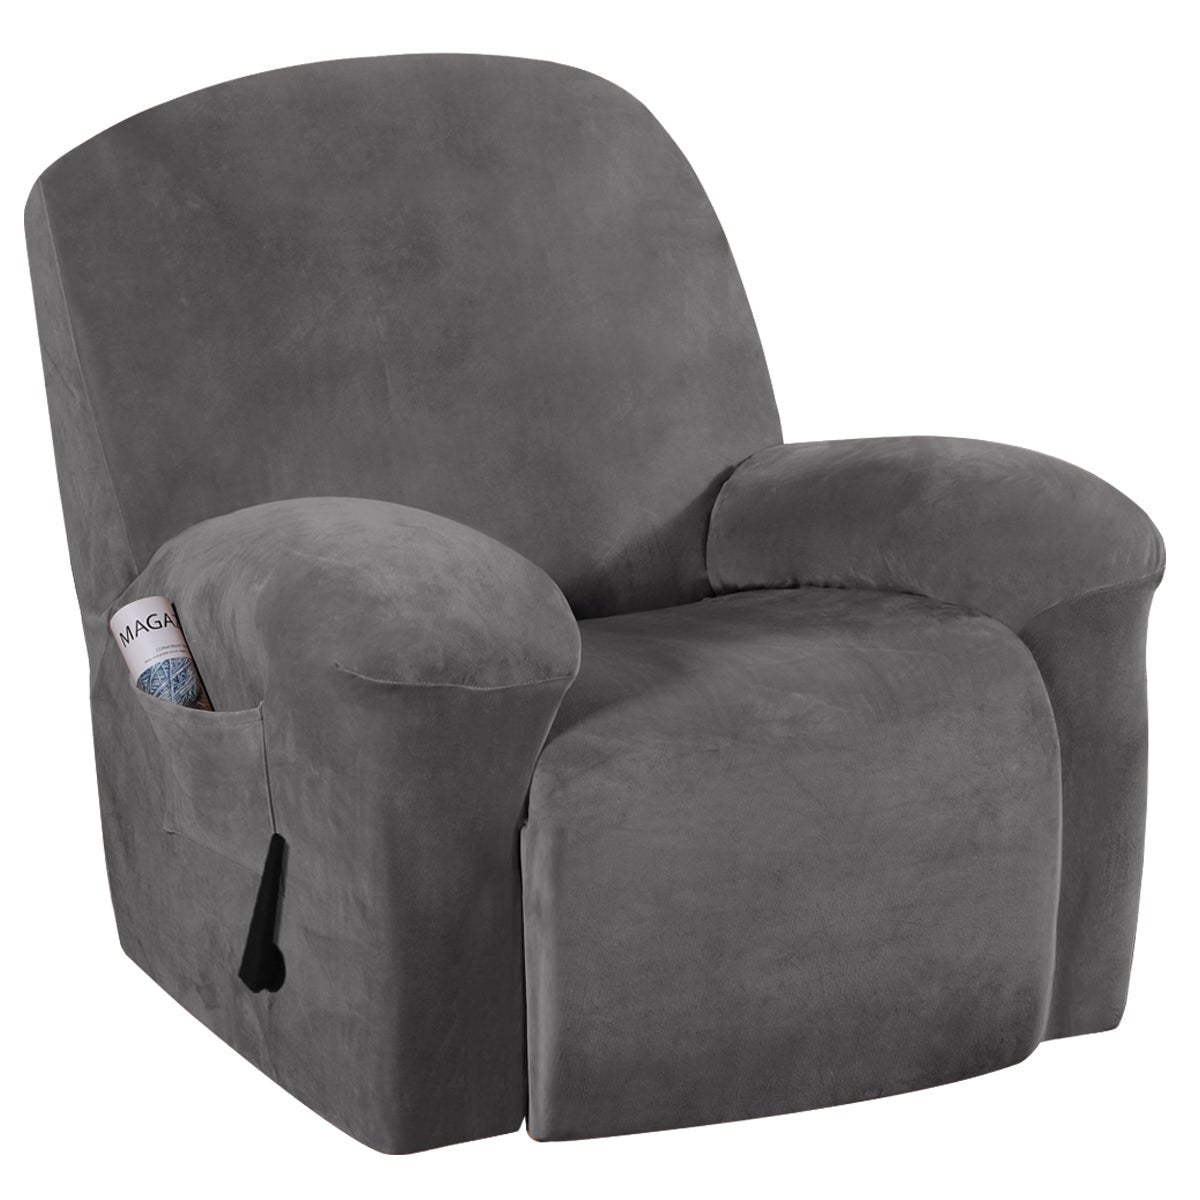 Velvet Stretch Recliner Chair Covers Slip Covers Feature Thick Velour Material